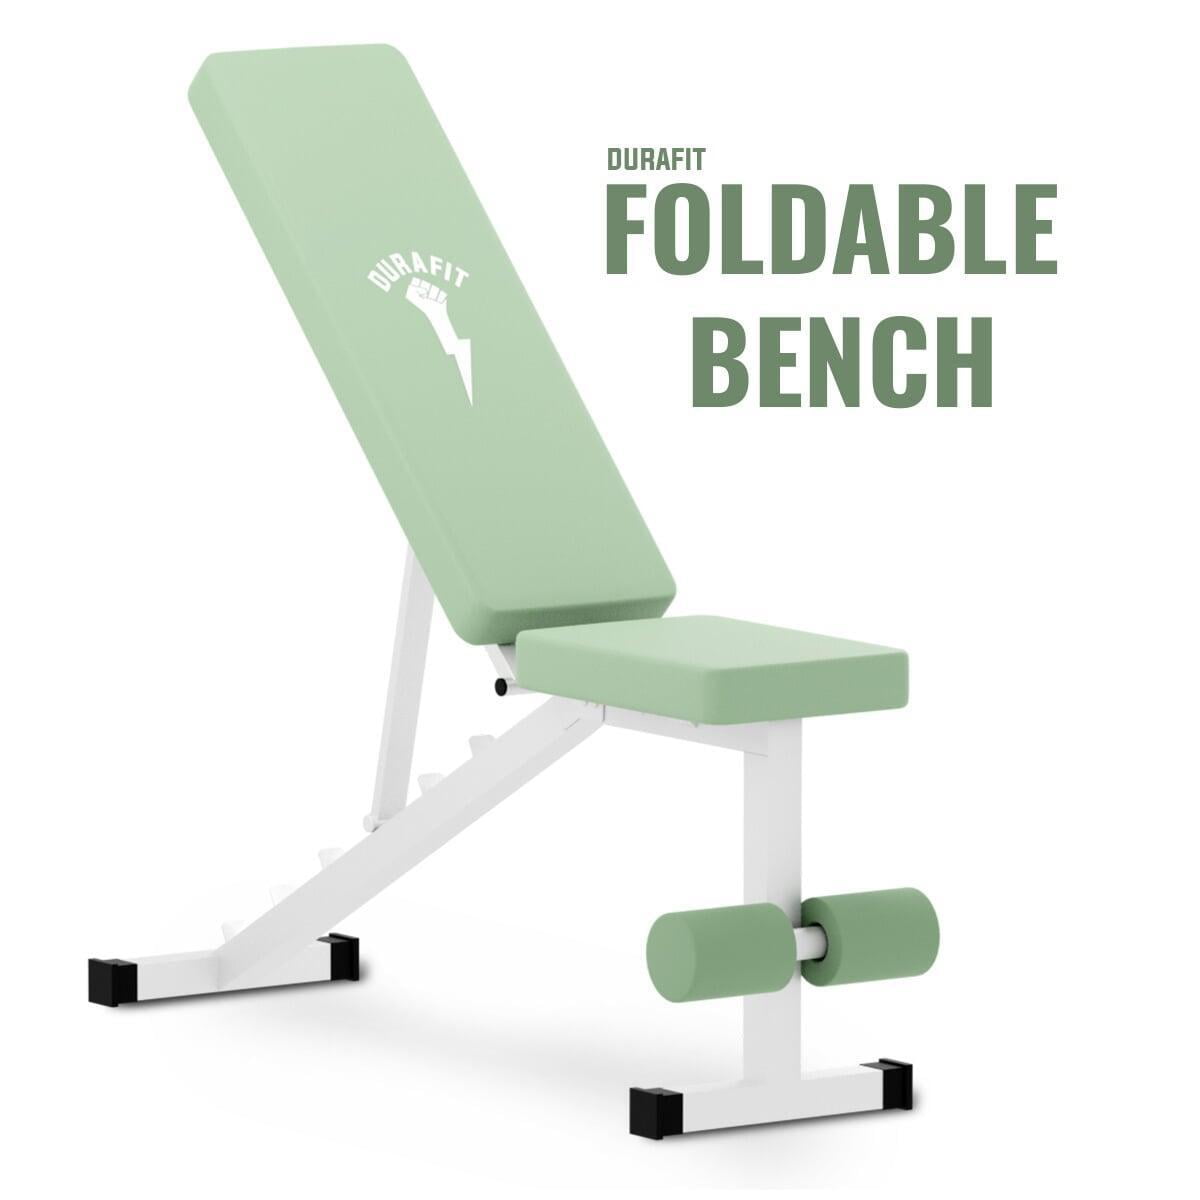 Durafit Foldable Bench FB01 with Multiple Benefits